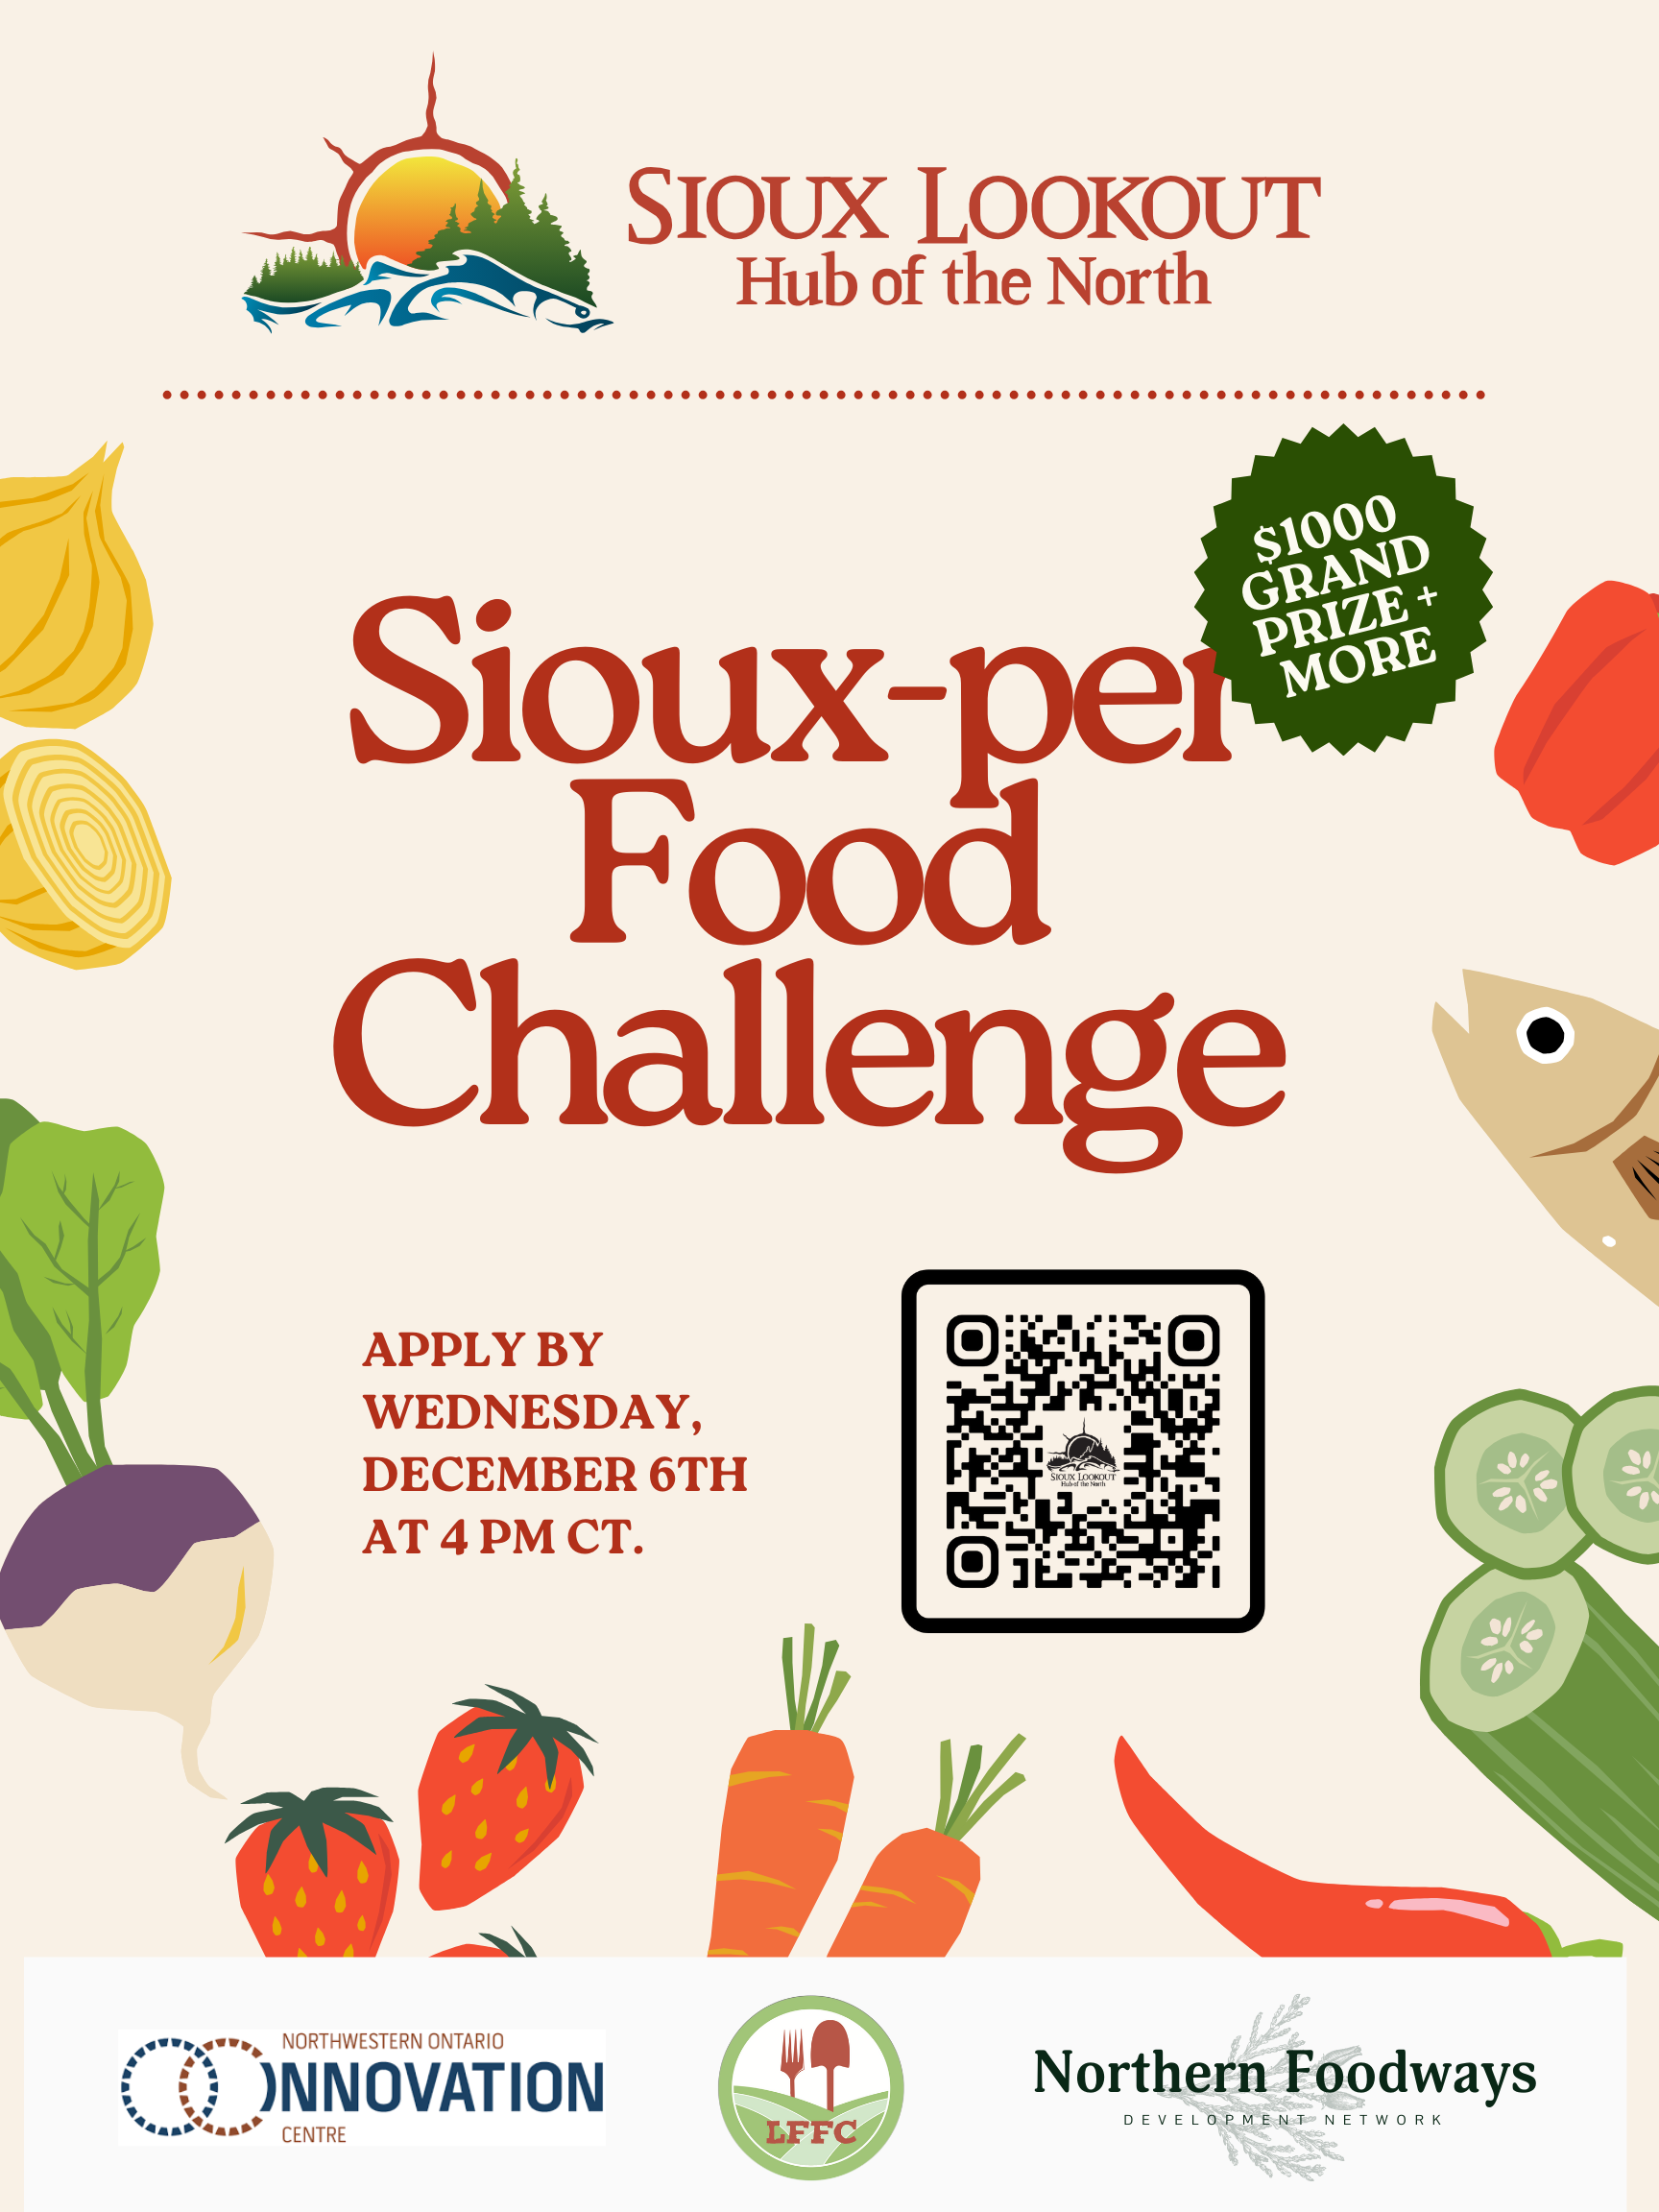 Sioux-per Food Challenge